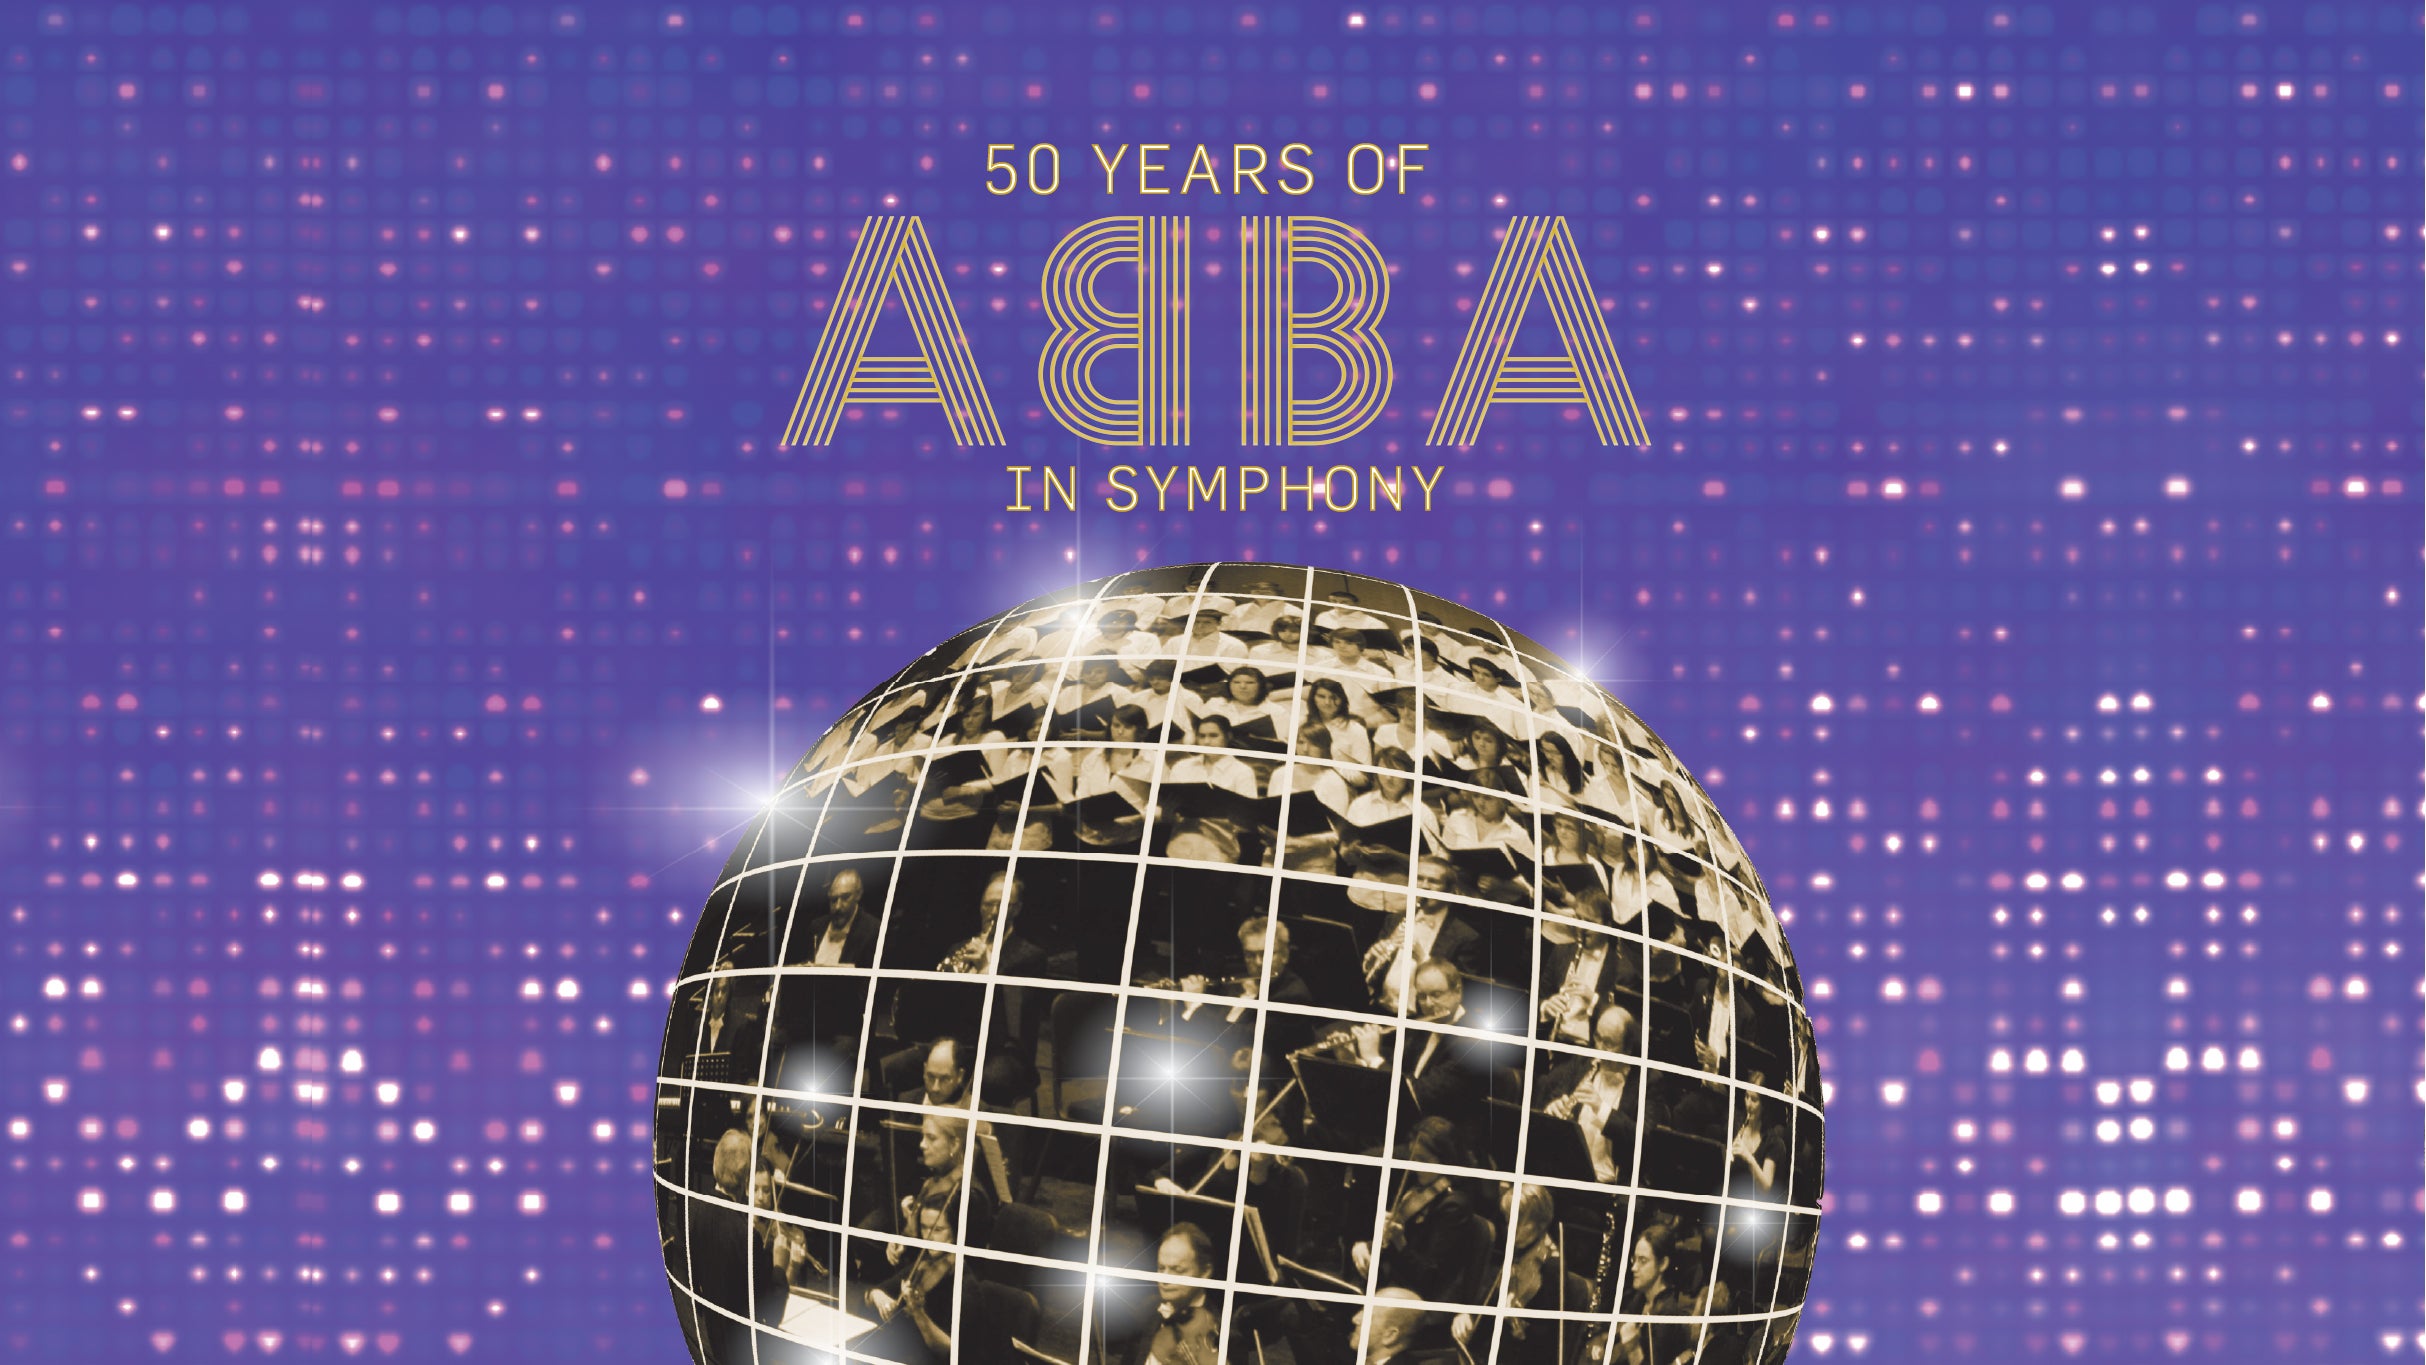 50 years of ABBA in symphony